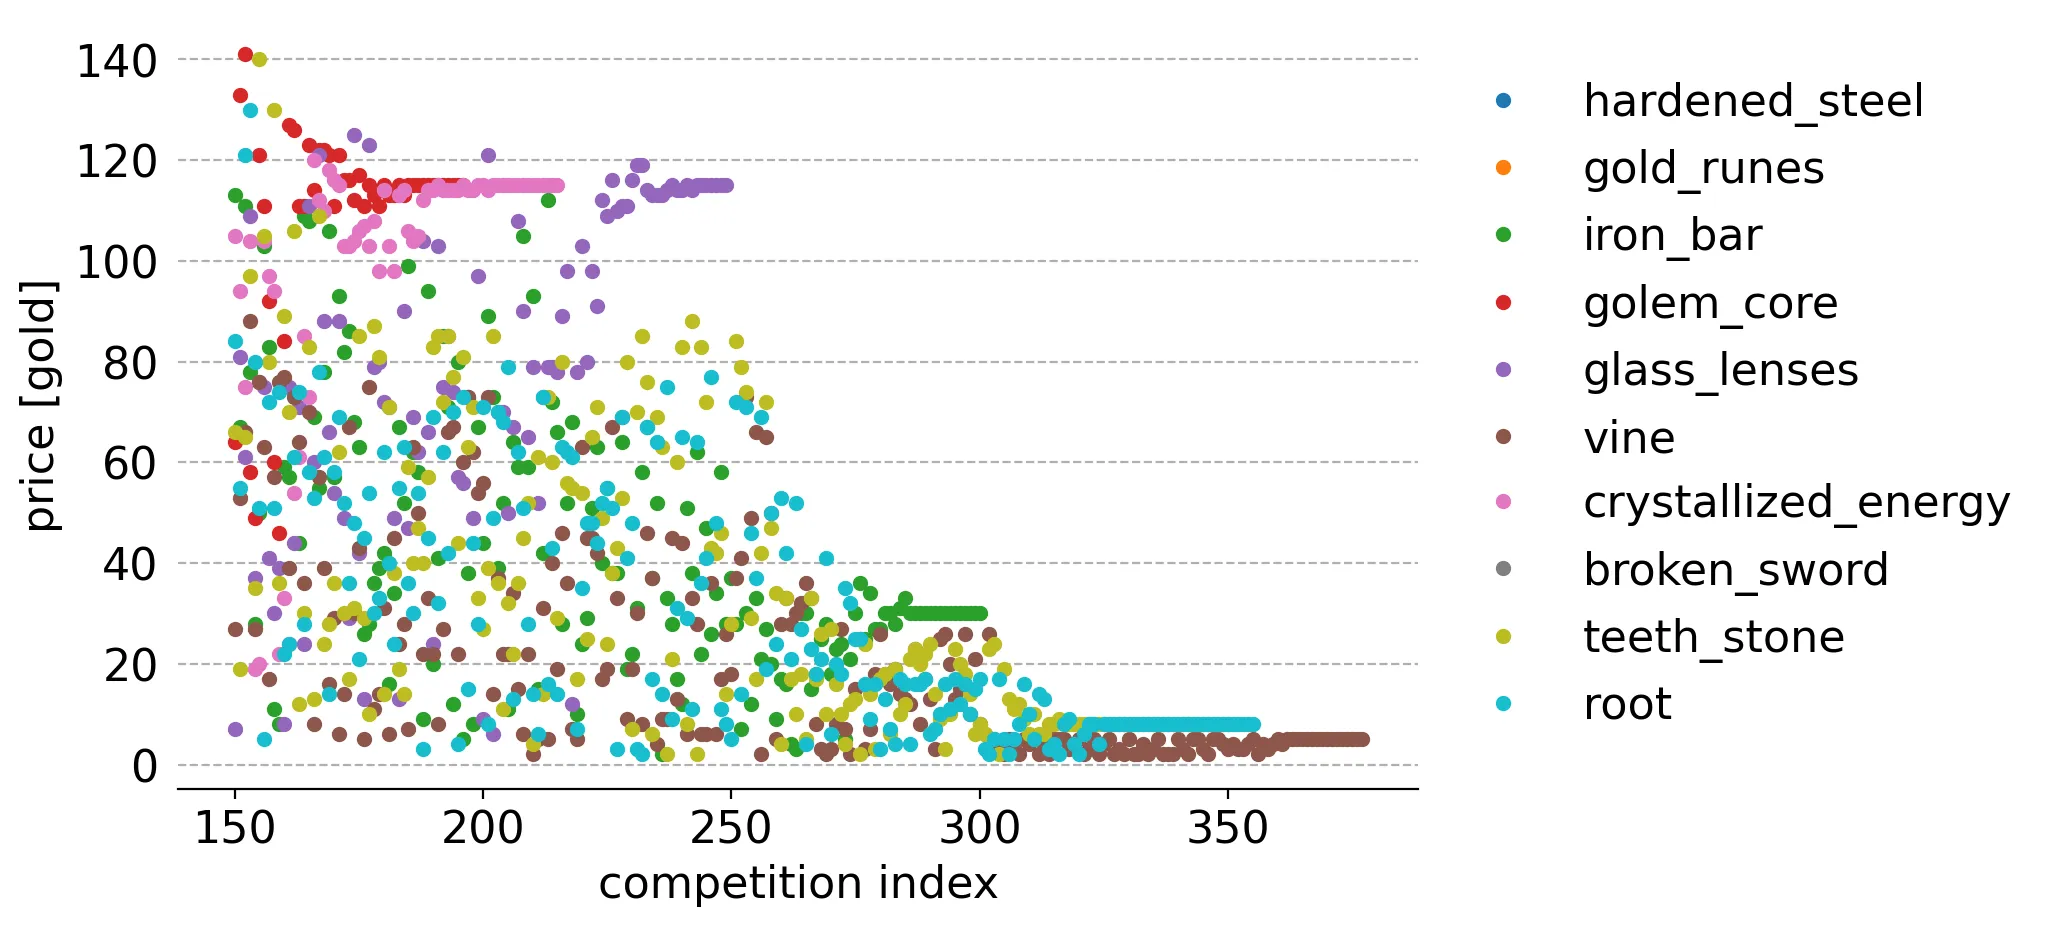 
    Shows the price (y-axis value) of each item (color) randomly chosen between its lower and upper
    ideal price bound range for that competition (index is x-value).
    Roughly corresponds to the rest of the reactions (after and including reaction 105),
    though includes instances when a competition was required to replace items on shelves
    with prices outside of its current price bounds.
    The highest of these points for each competition ended up being moved from the inventory to the
    shelf at that price.
    Shows how random price competition occurs until only golem cores are selected for shelves until
    sold off.
    Then crystallized energy, at the same price is sold off.
    Then the same ideal price, after some exploration, is found by the algorithm and sold off
    exclusively.
    For all three, the remaining items oscillate underneath, seemingly in the same bounds.
    After all three are exhausted, competiton between remaining items continues with lower and lower
    prices on the shelf until teeth stone and root are randomly selected between for sale at the
    ideal price.
    Finally the ideal price for vine is found and it is sold off.